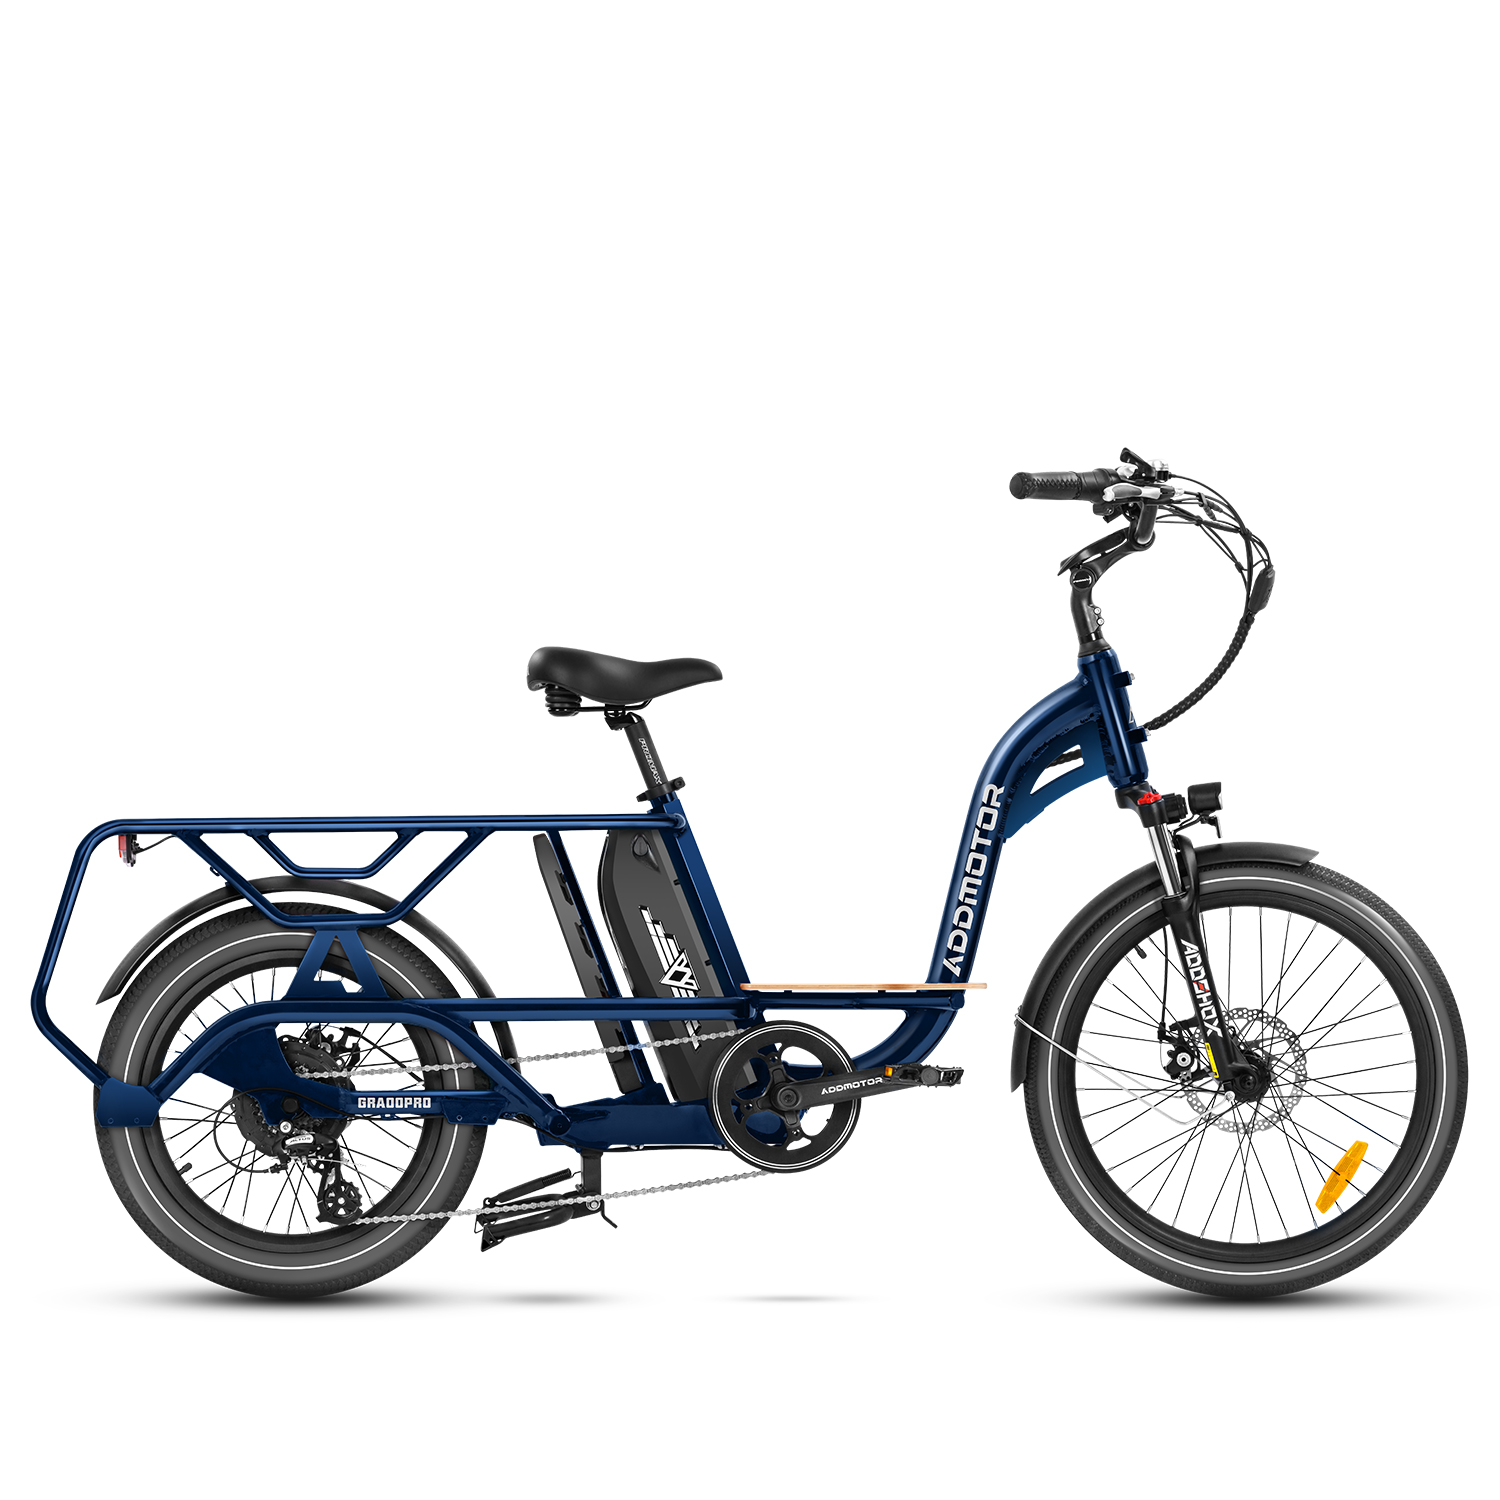 Addmotor Graoopro Electric Bike | Best Dual Battery Cargo Electric Bicycle | Adults 750W Rear Motor Ebikes | Starry Blue + Dual-Battery